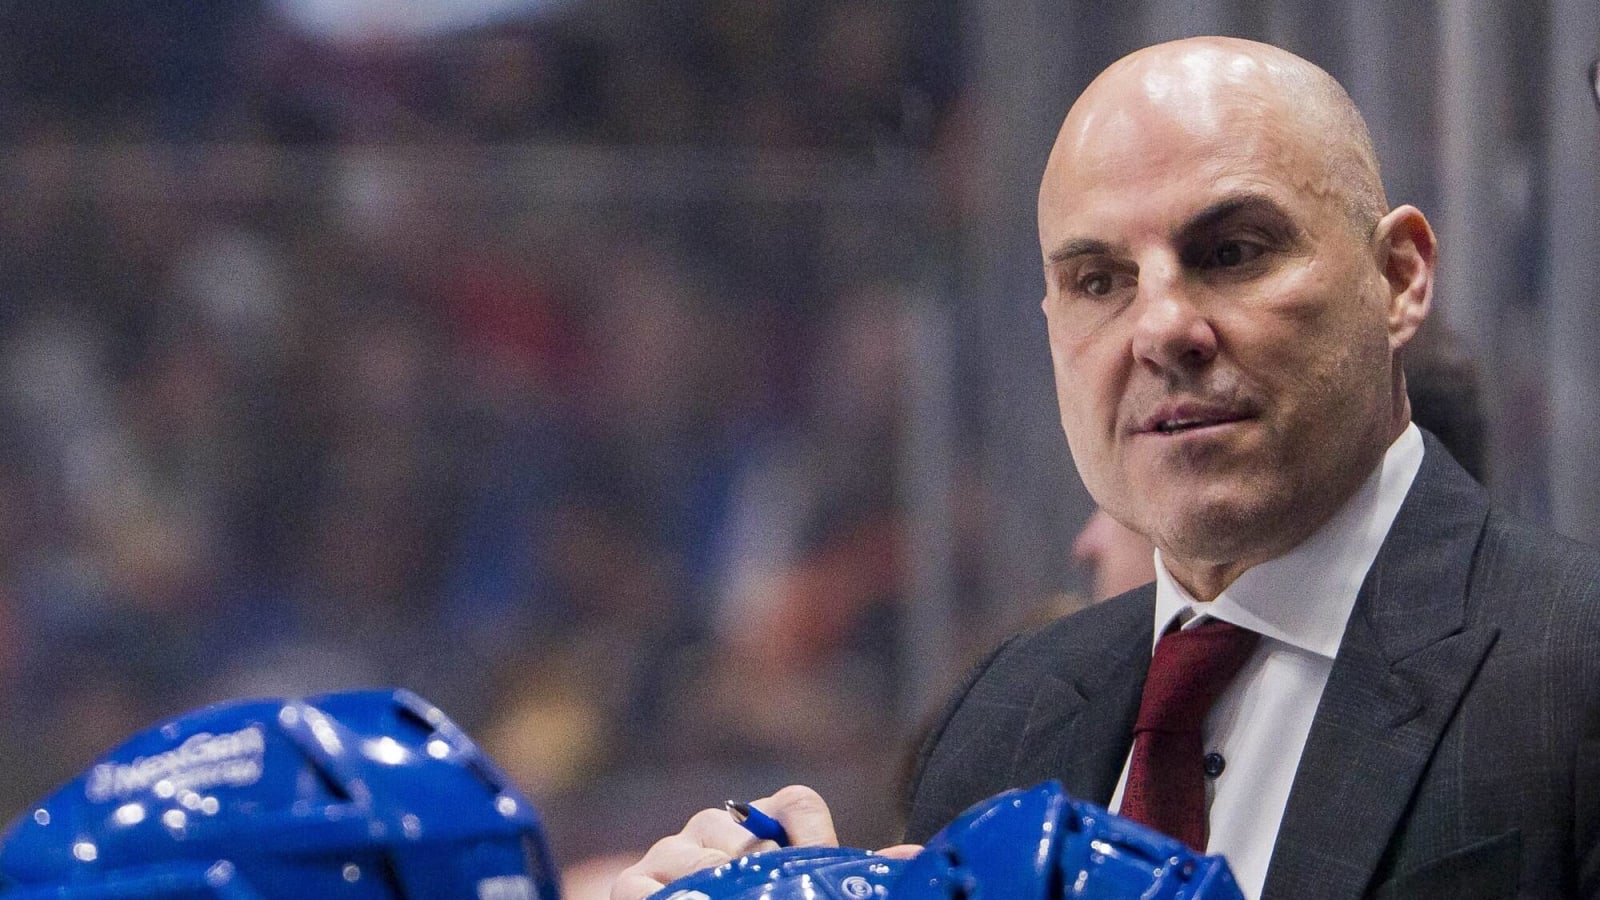  Tocchet’s line blender didn’t exactly help Canucks in their quest to break down stifling Kings